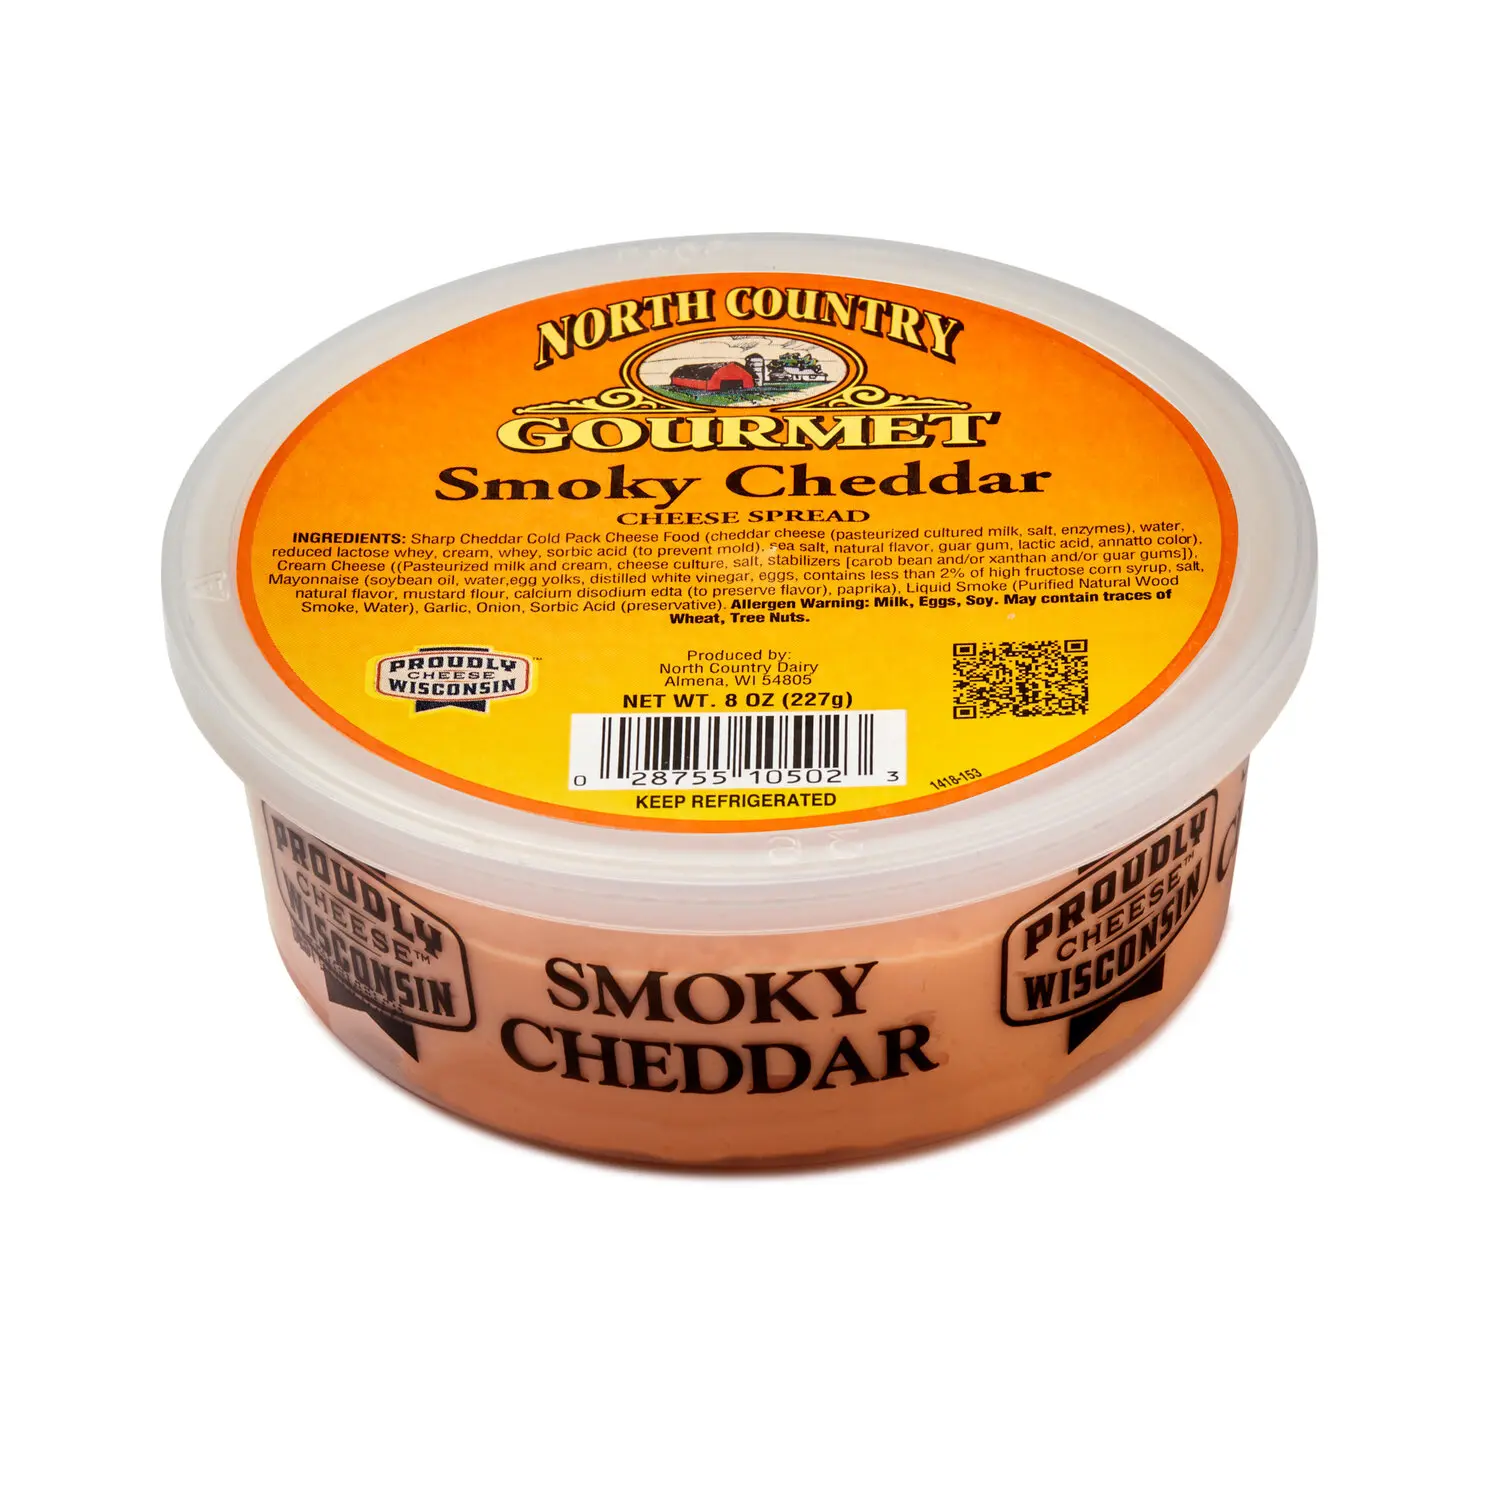 smoked cheddar cheese spread - How do you eat cheddar cheese spread